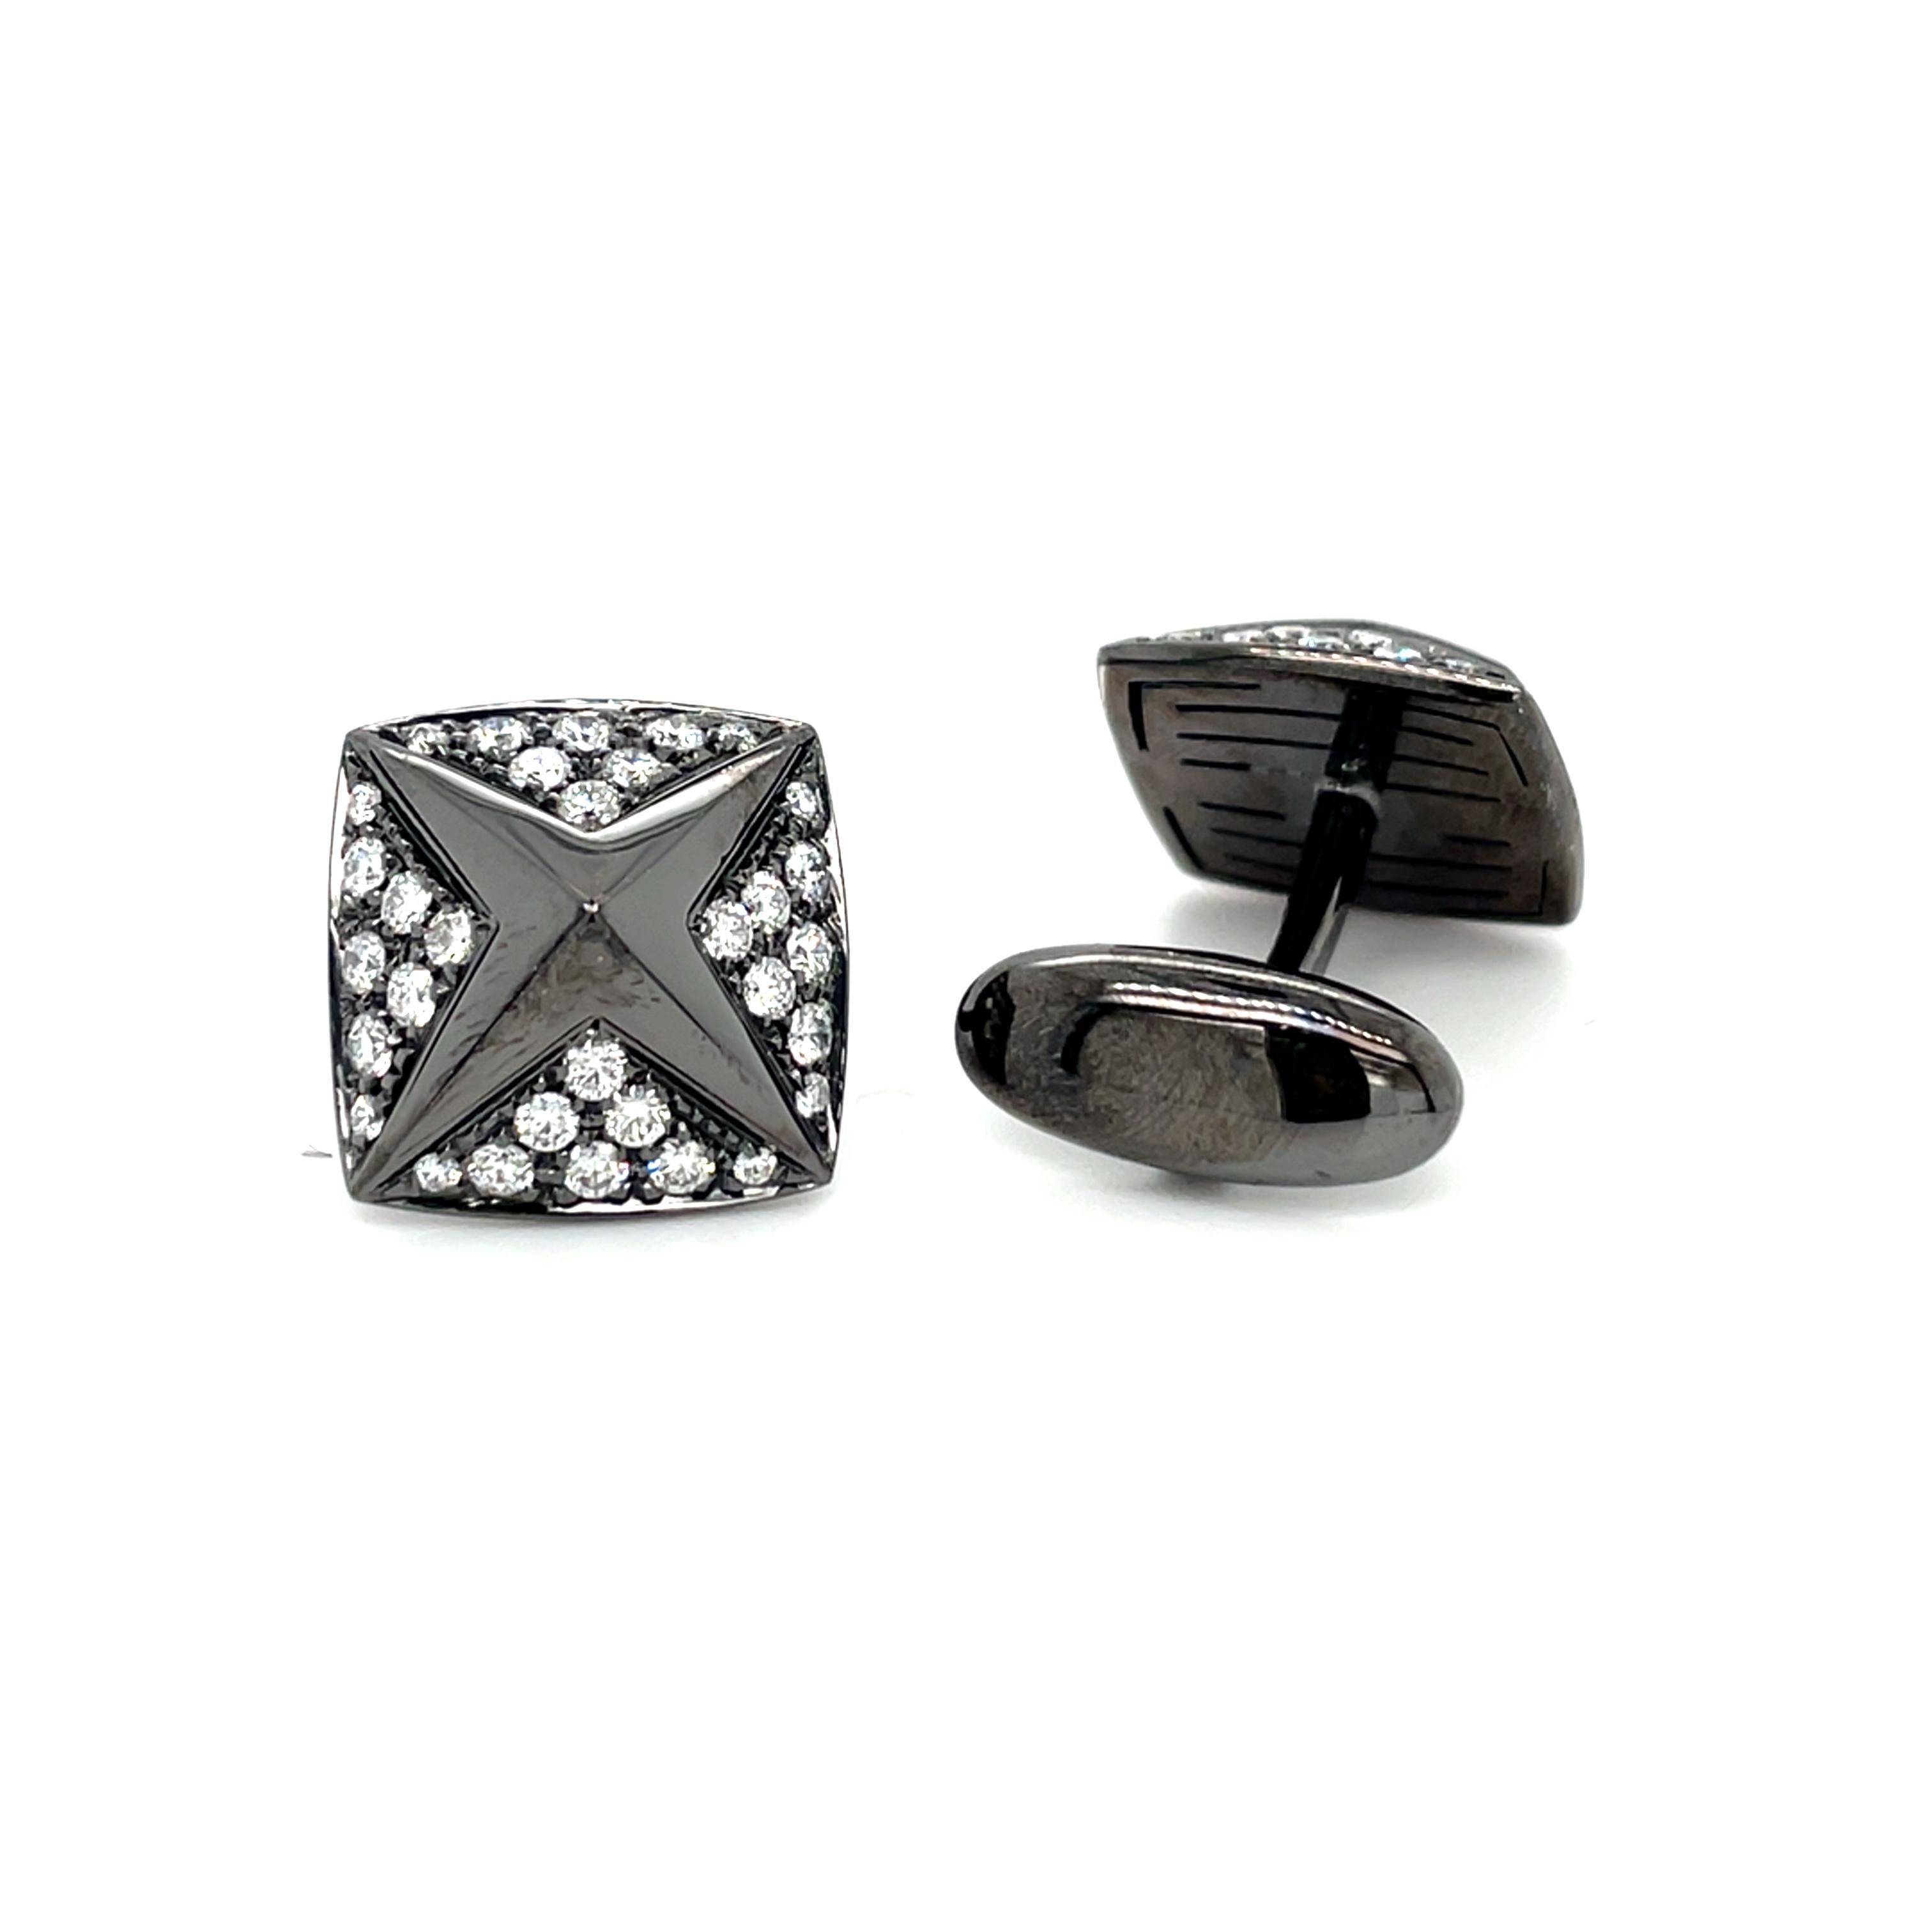 These  white gold cufflinks are from Men's Collection. These black rhodium cufflinks are decorated with diamonds G color VS2 clarity. The total amount of diamonds is 1.34 Carat. The dimensions of the cufflinks are 1.4cm x 1.4cm. These cufflinks are